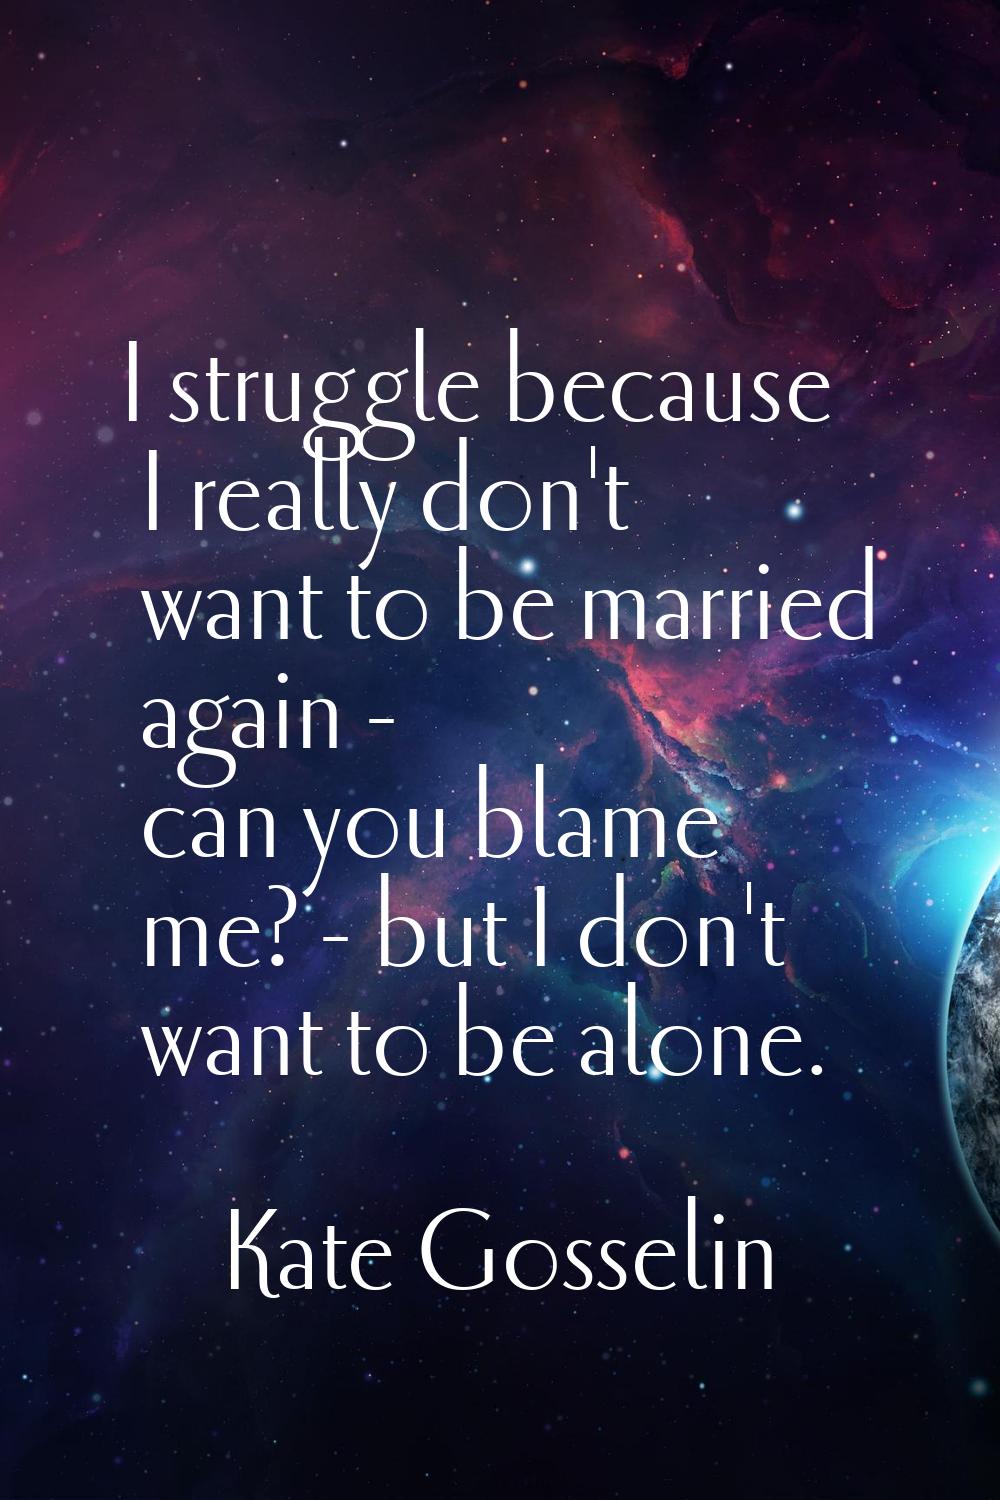 I struggle because I really don't want to be married again - can you blame me? - but I don't want t